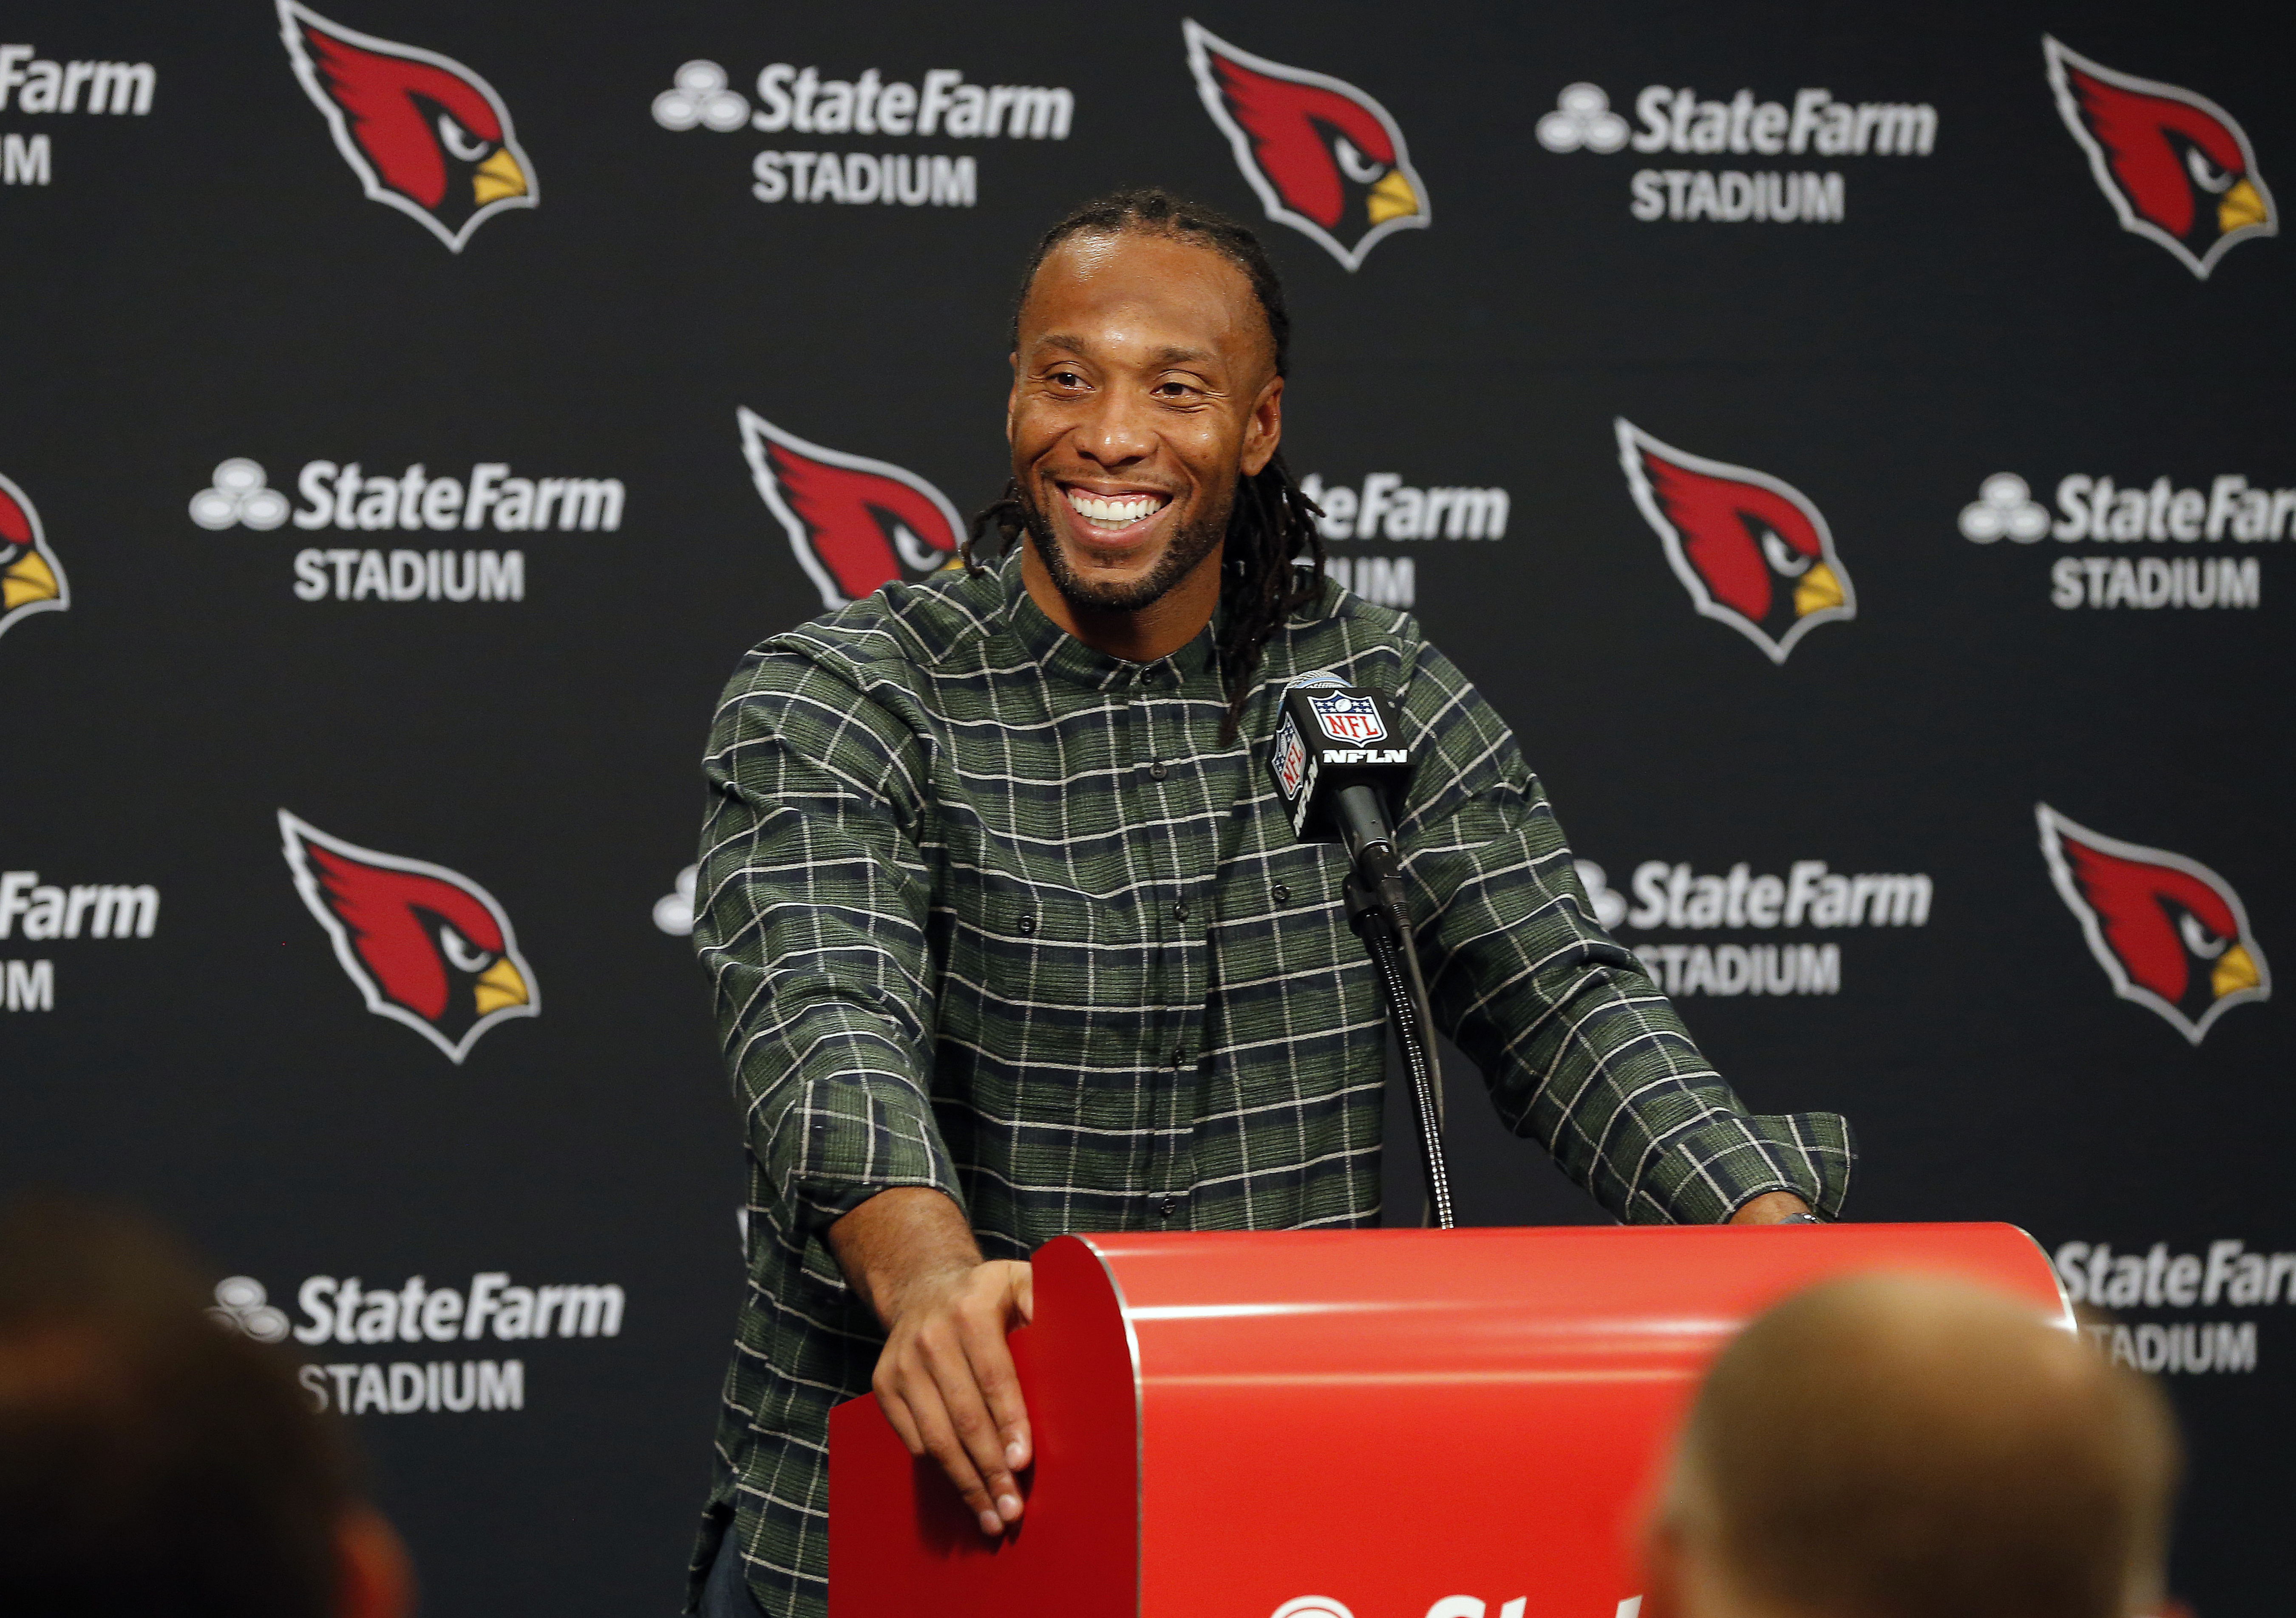 Larry Fitzgerald returning to Cardinals for 16th season